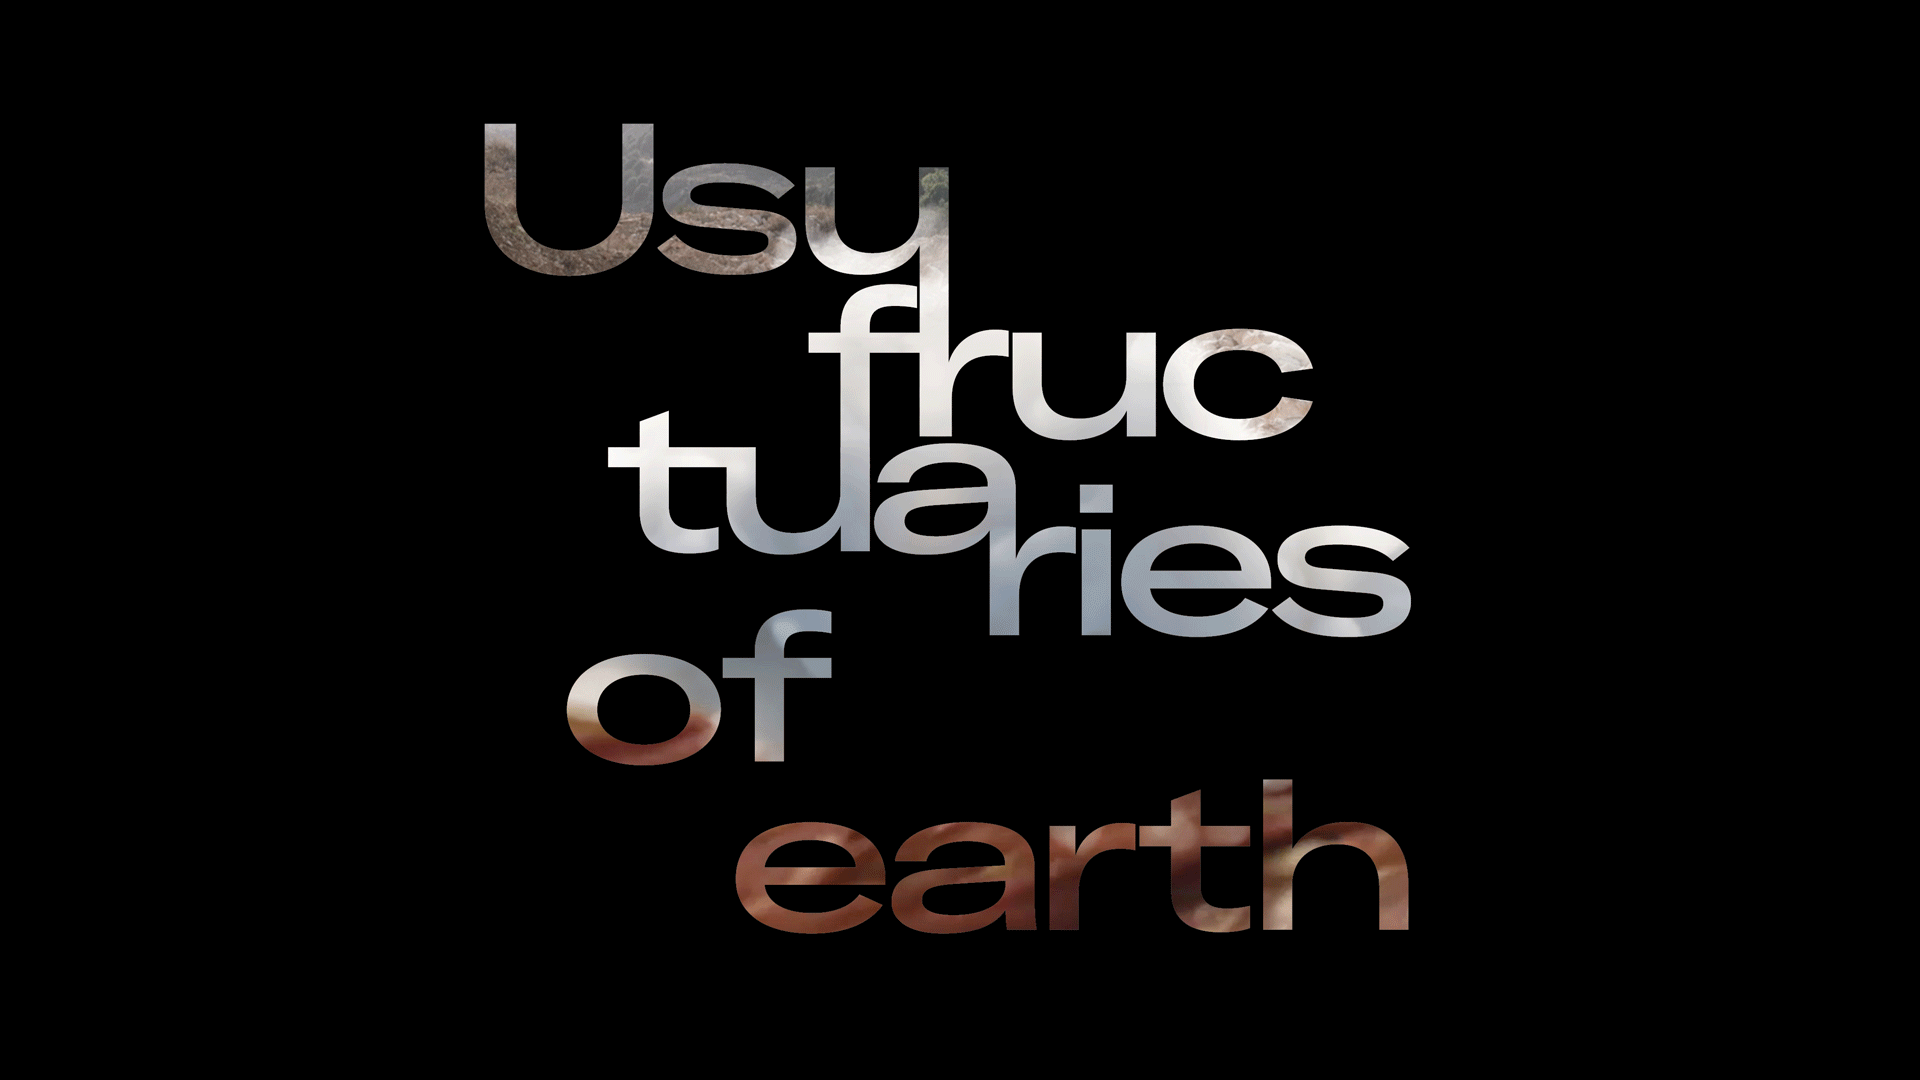 Usufructuaries of earth